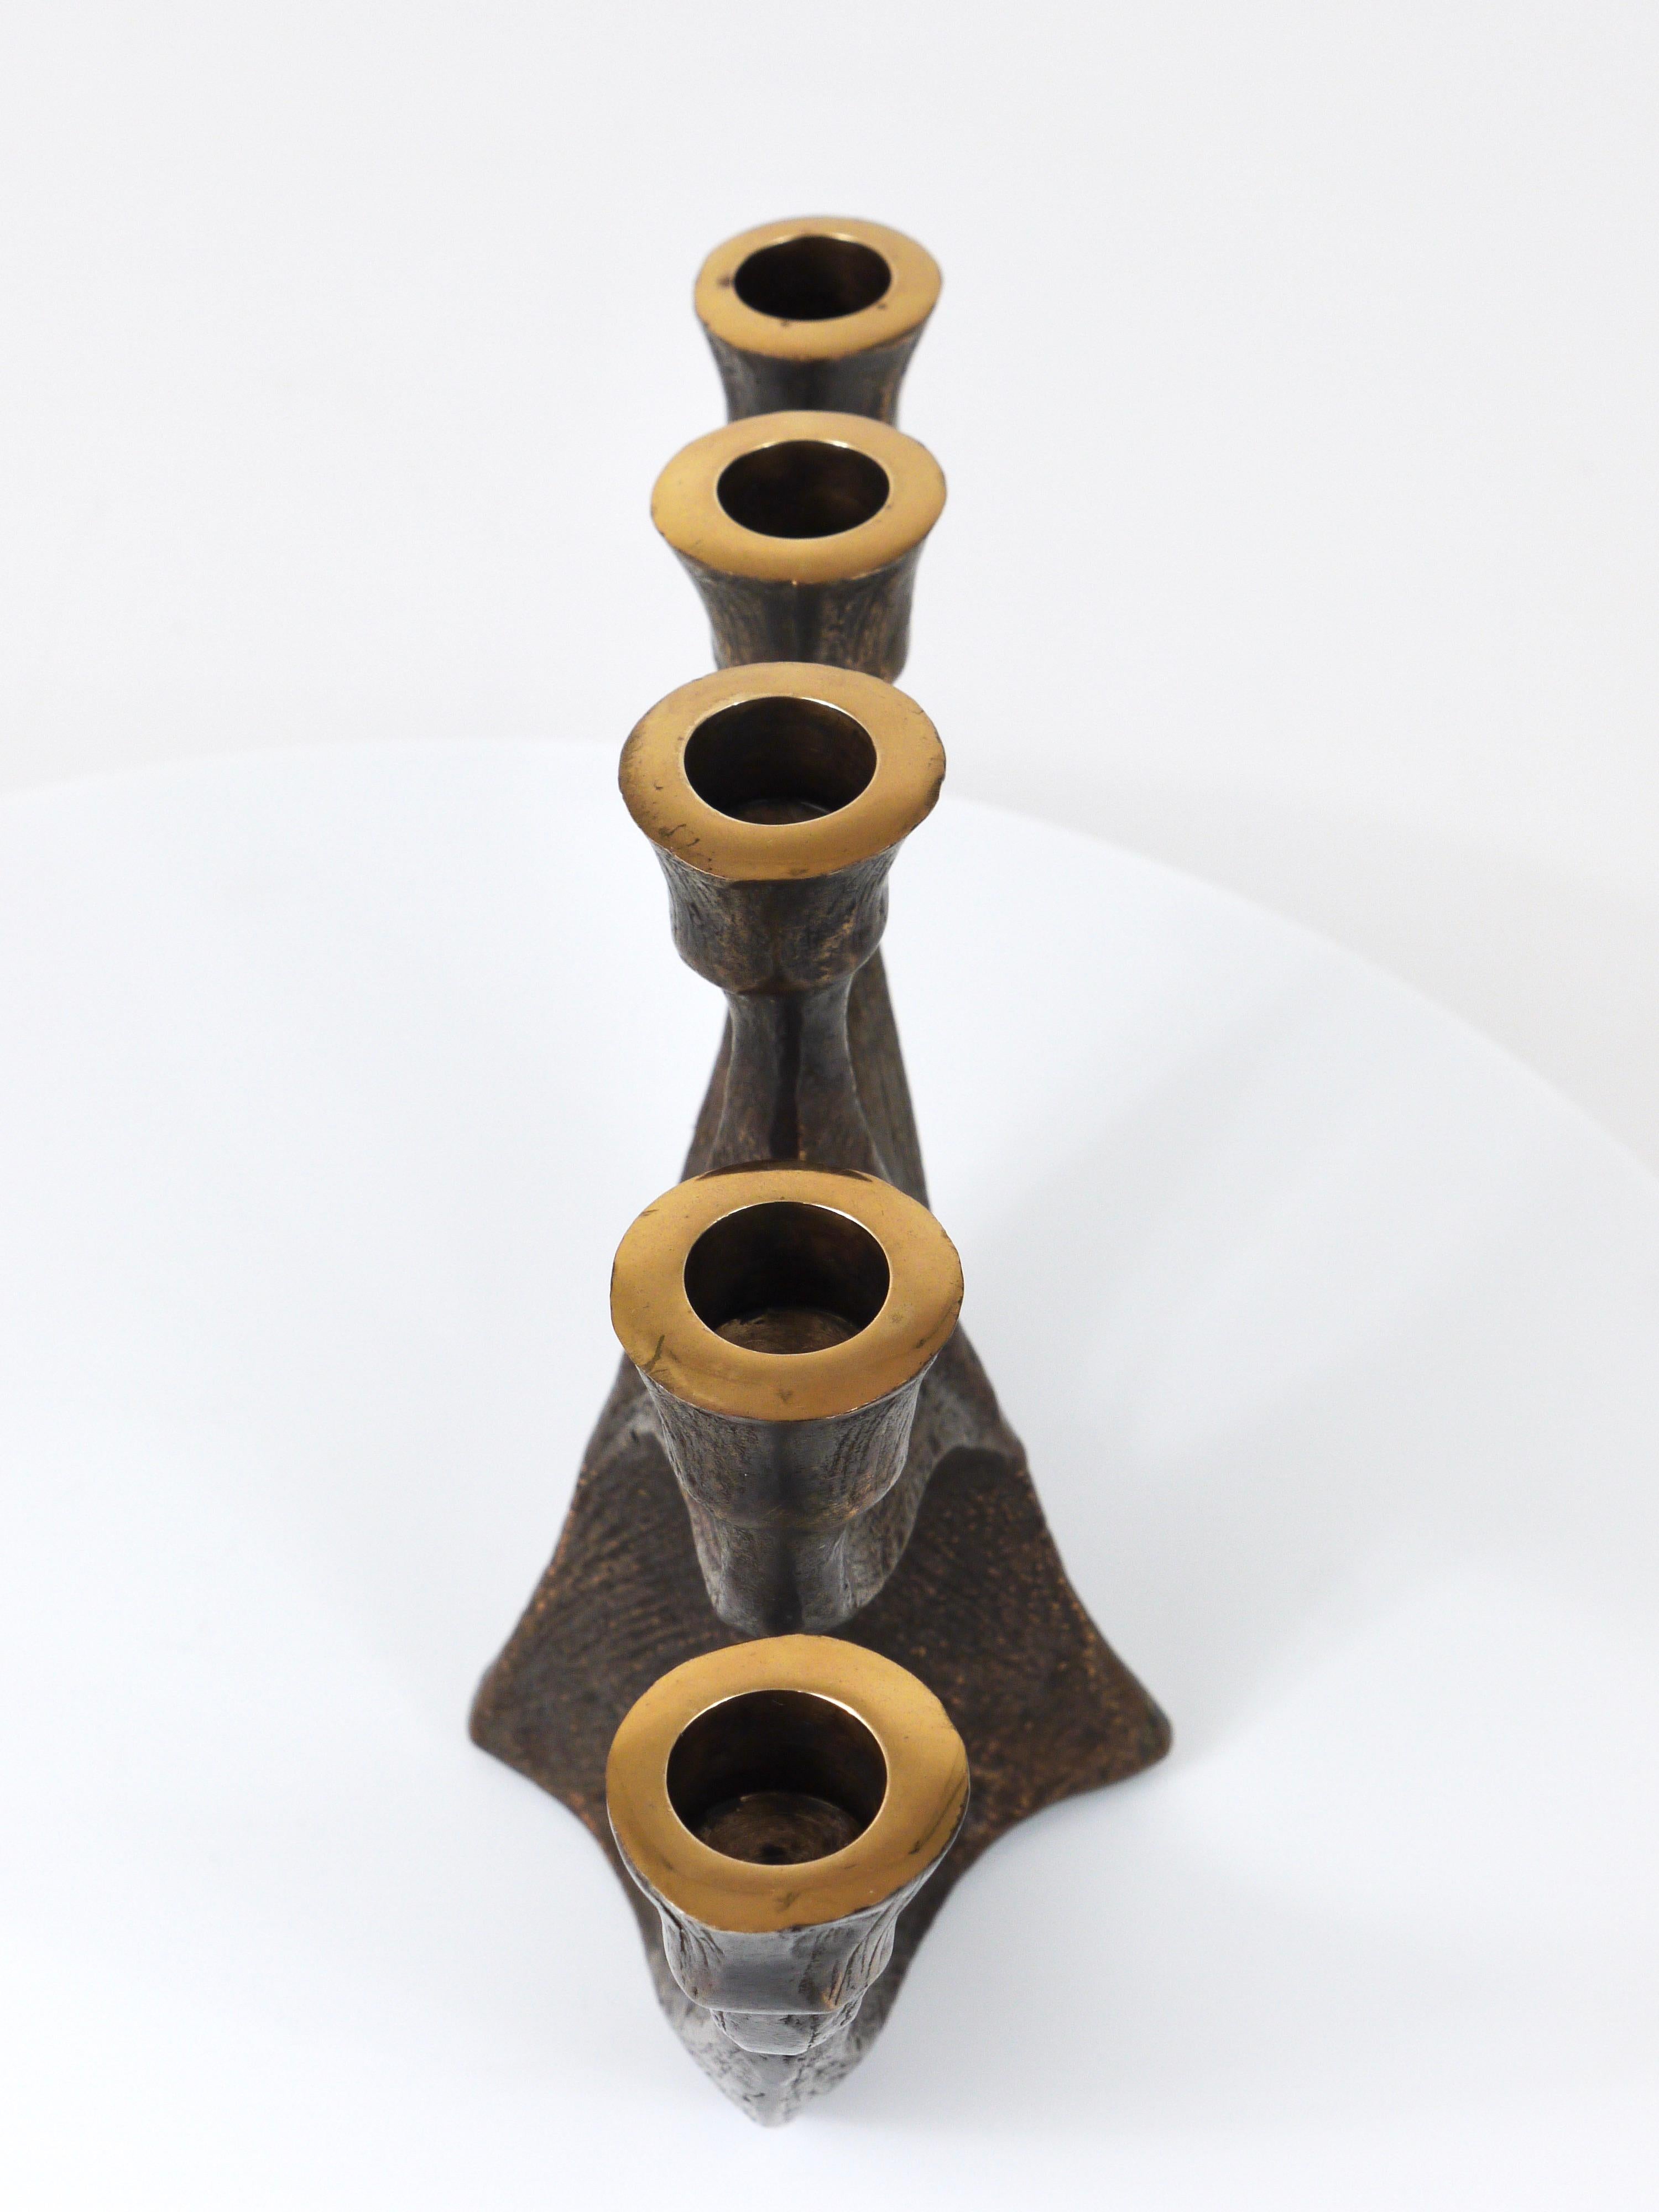 Up to Two Midcentury Brutalist Bronze Candleholders by Michael Harjes, 1960s For Sale 9